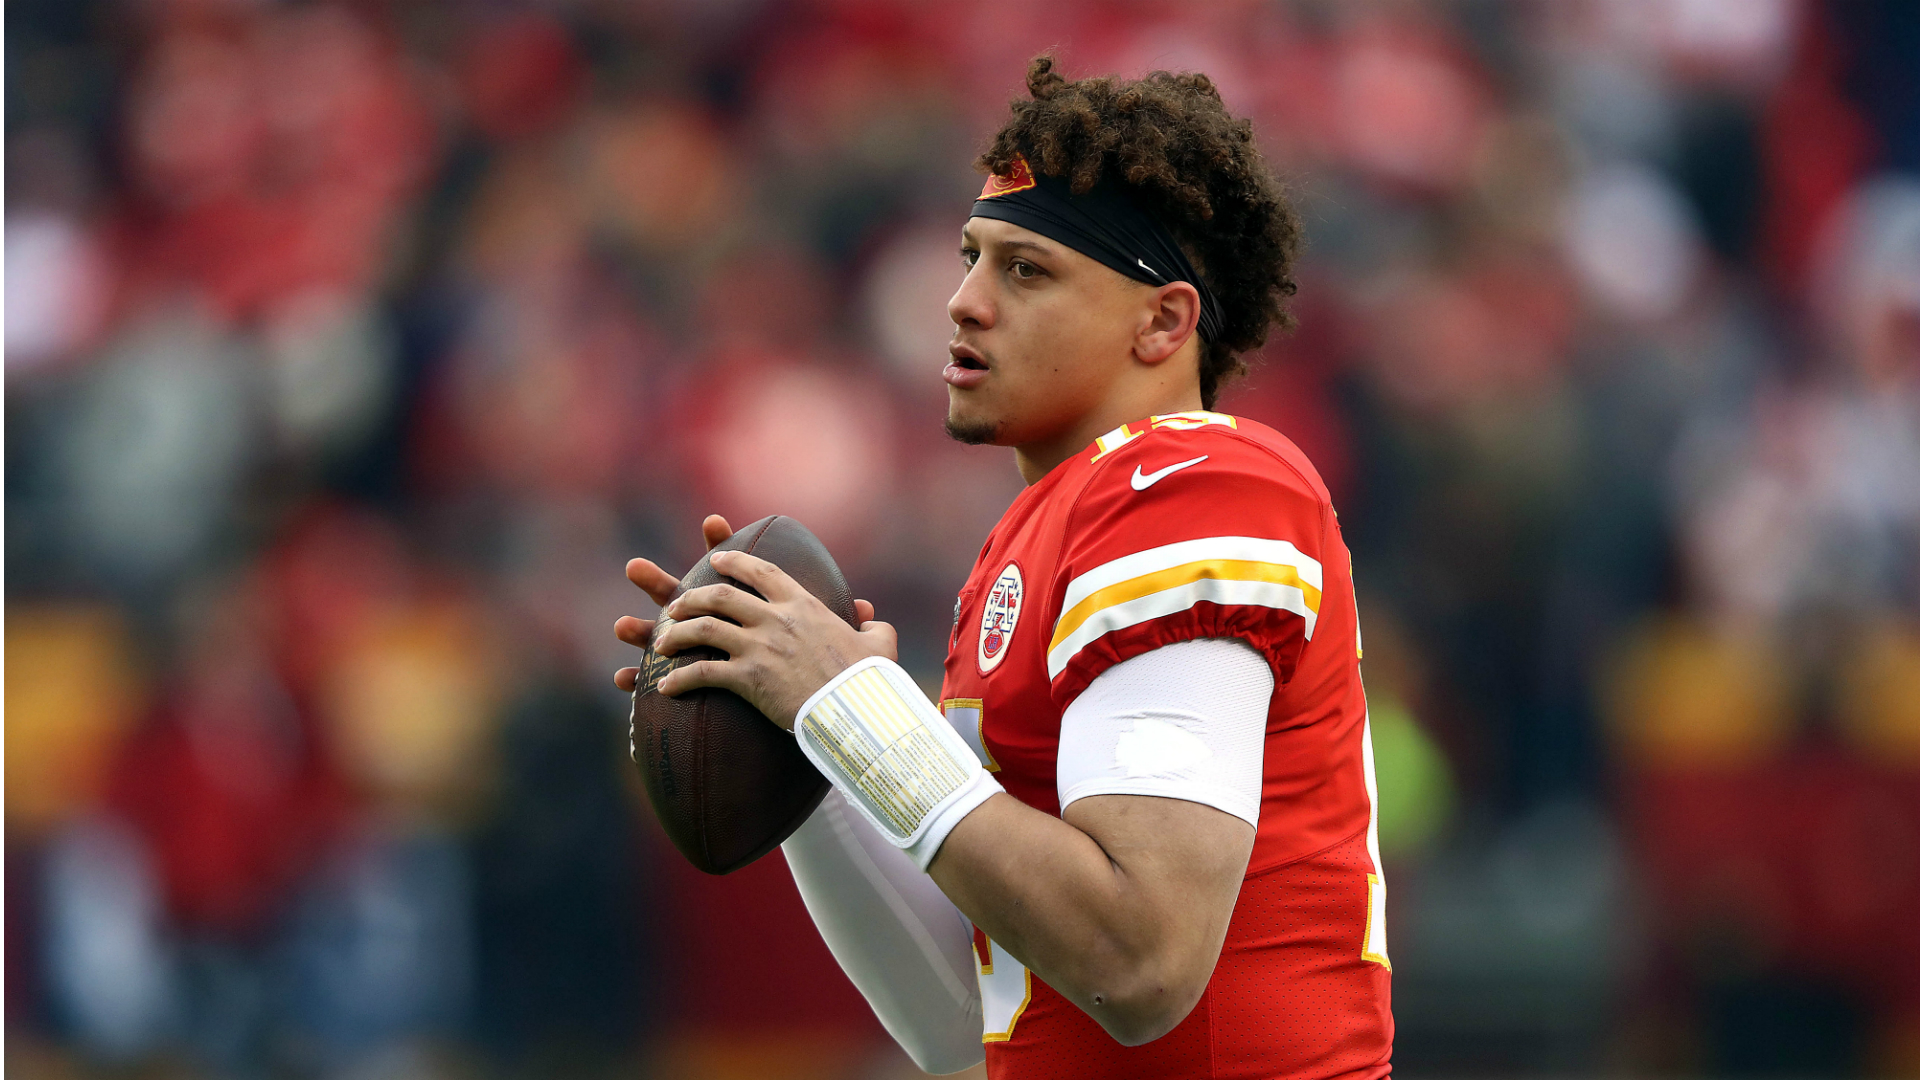 Kansas City Chiefs 2019 season schedule, scores and TV streams in Canada | Sporting ...1920 x 1080